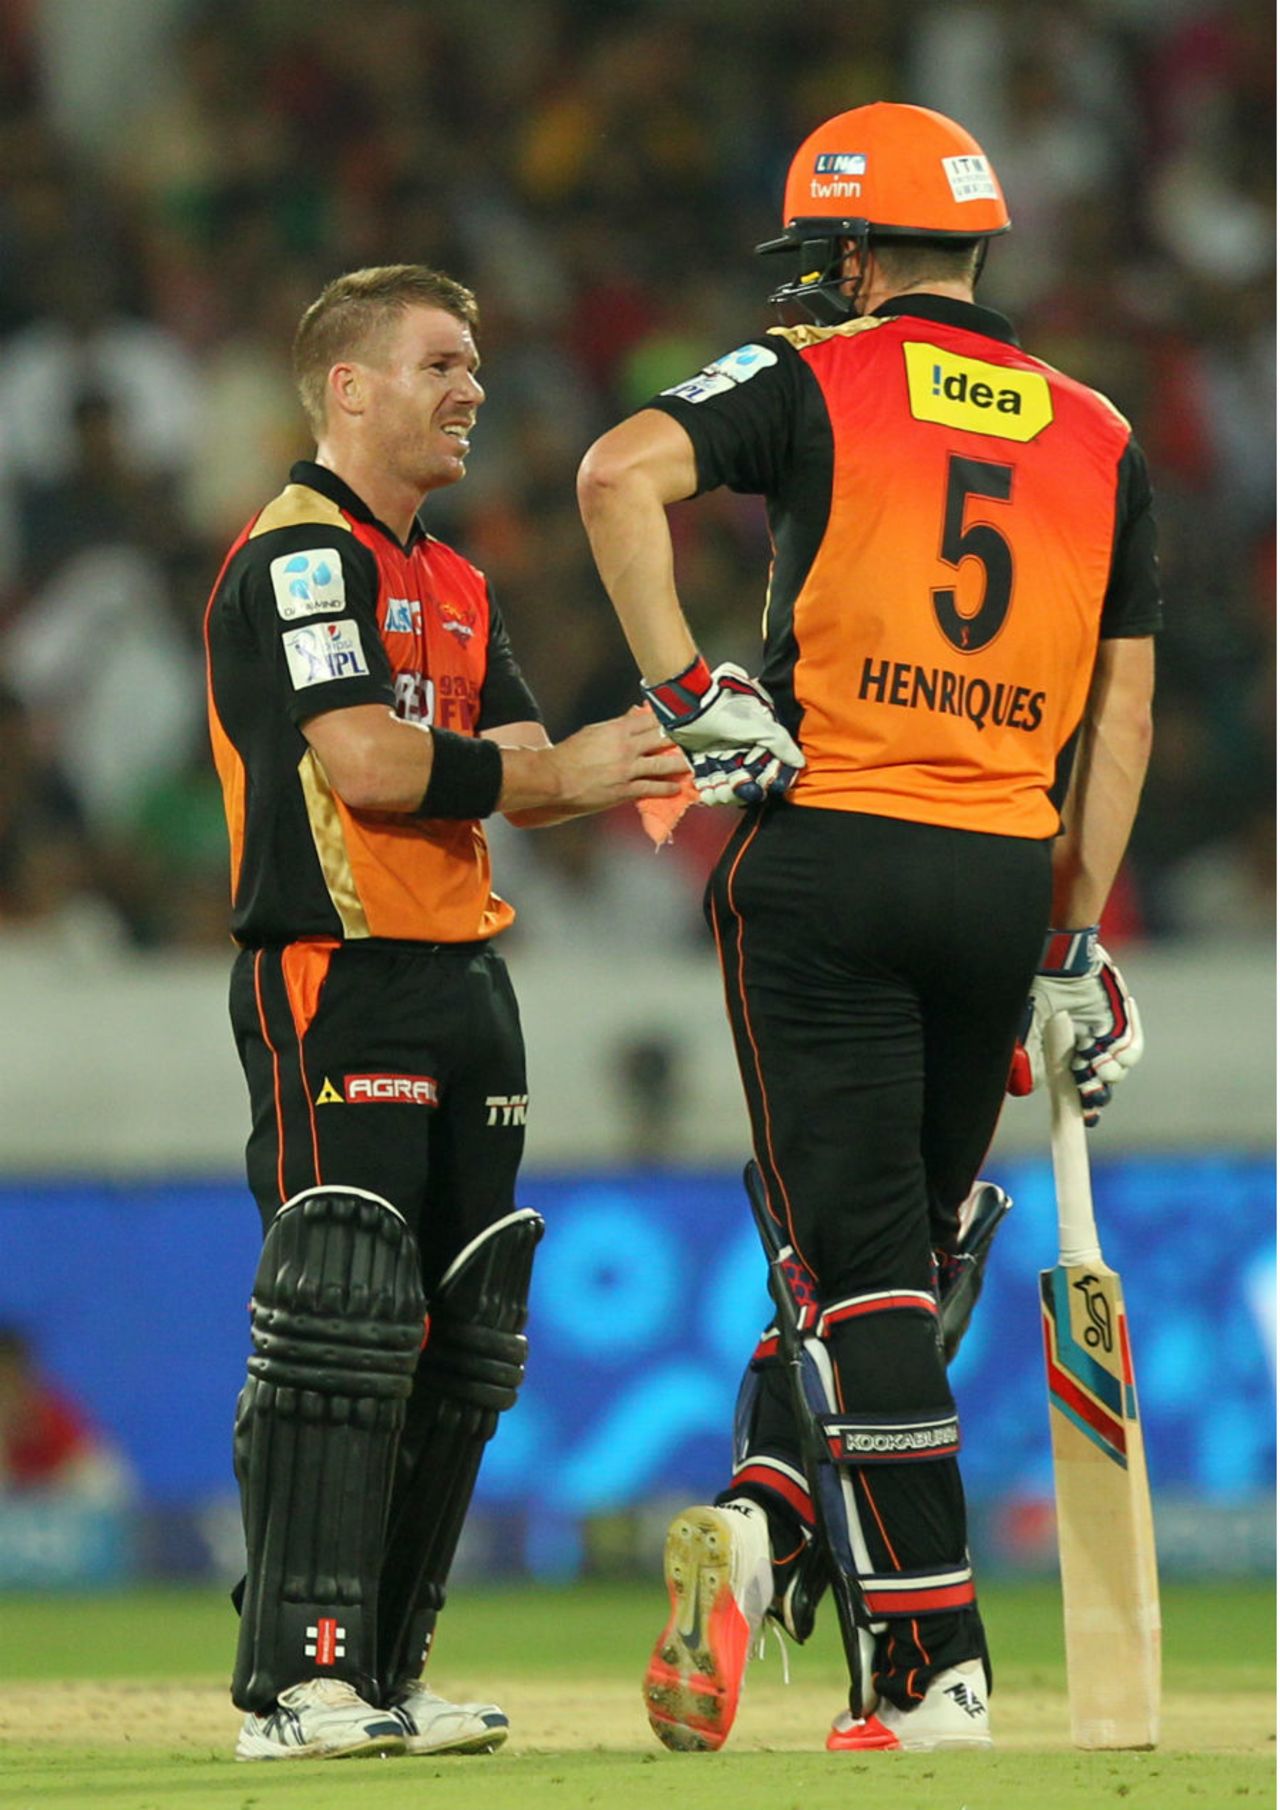 David Warner and Moises Henriques put on 103 in 7.1 overs, Sunrisers Hyderabad v Royal Challengers Bangalore, IPL 2015, Hyderabad, May 15, 2015